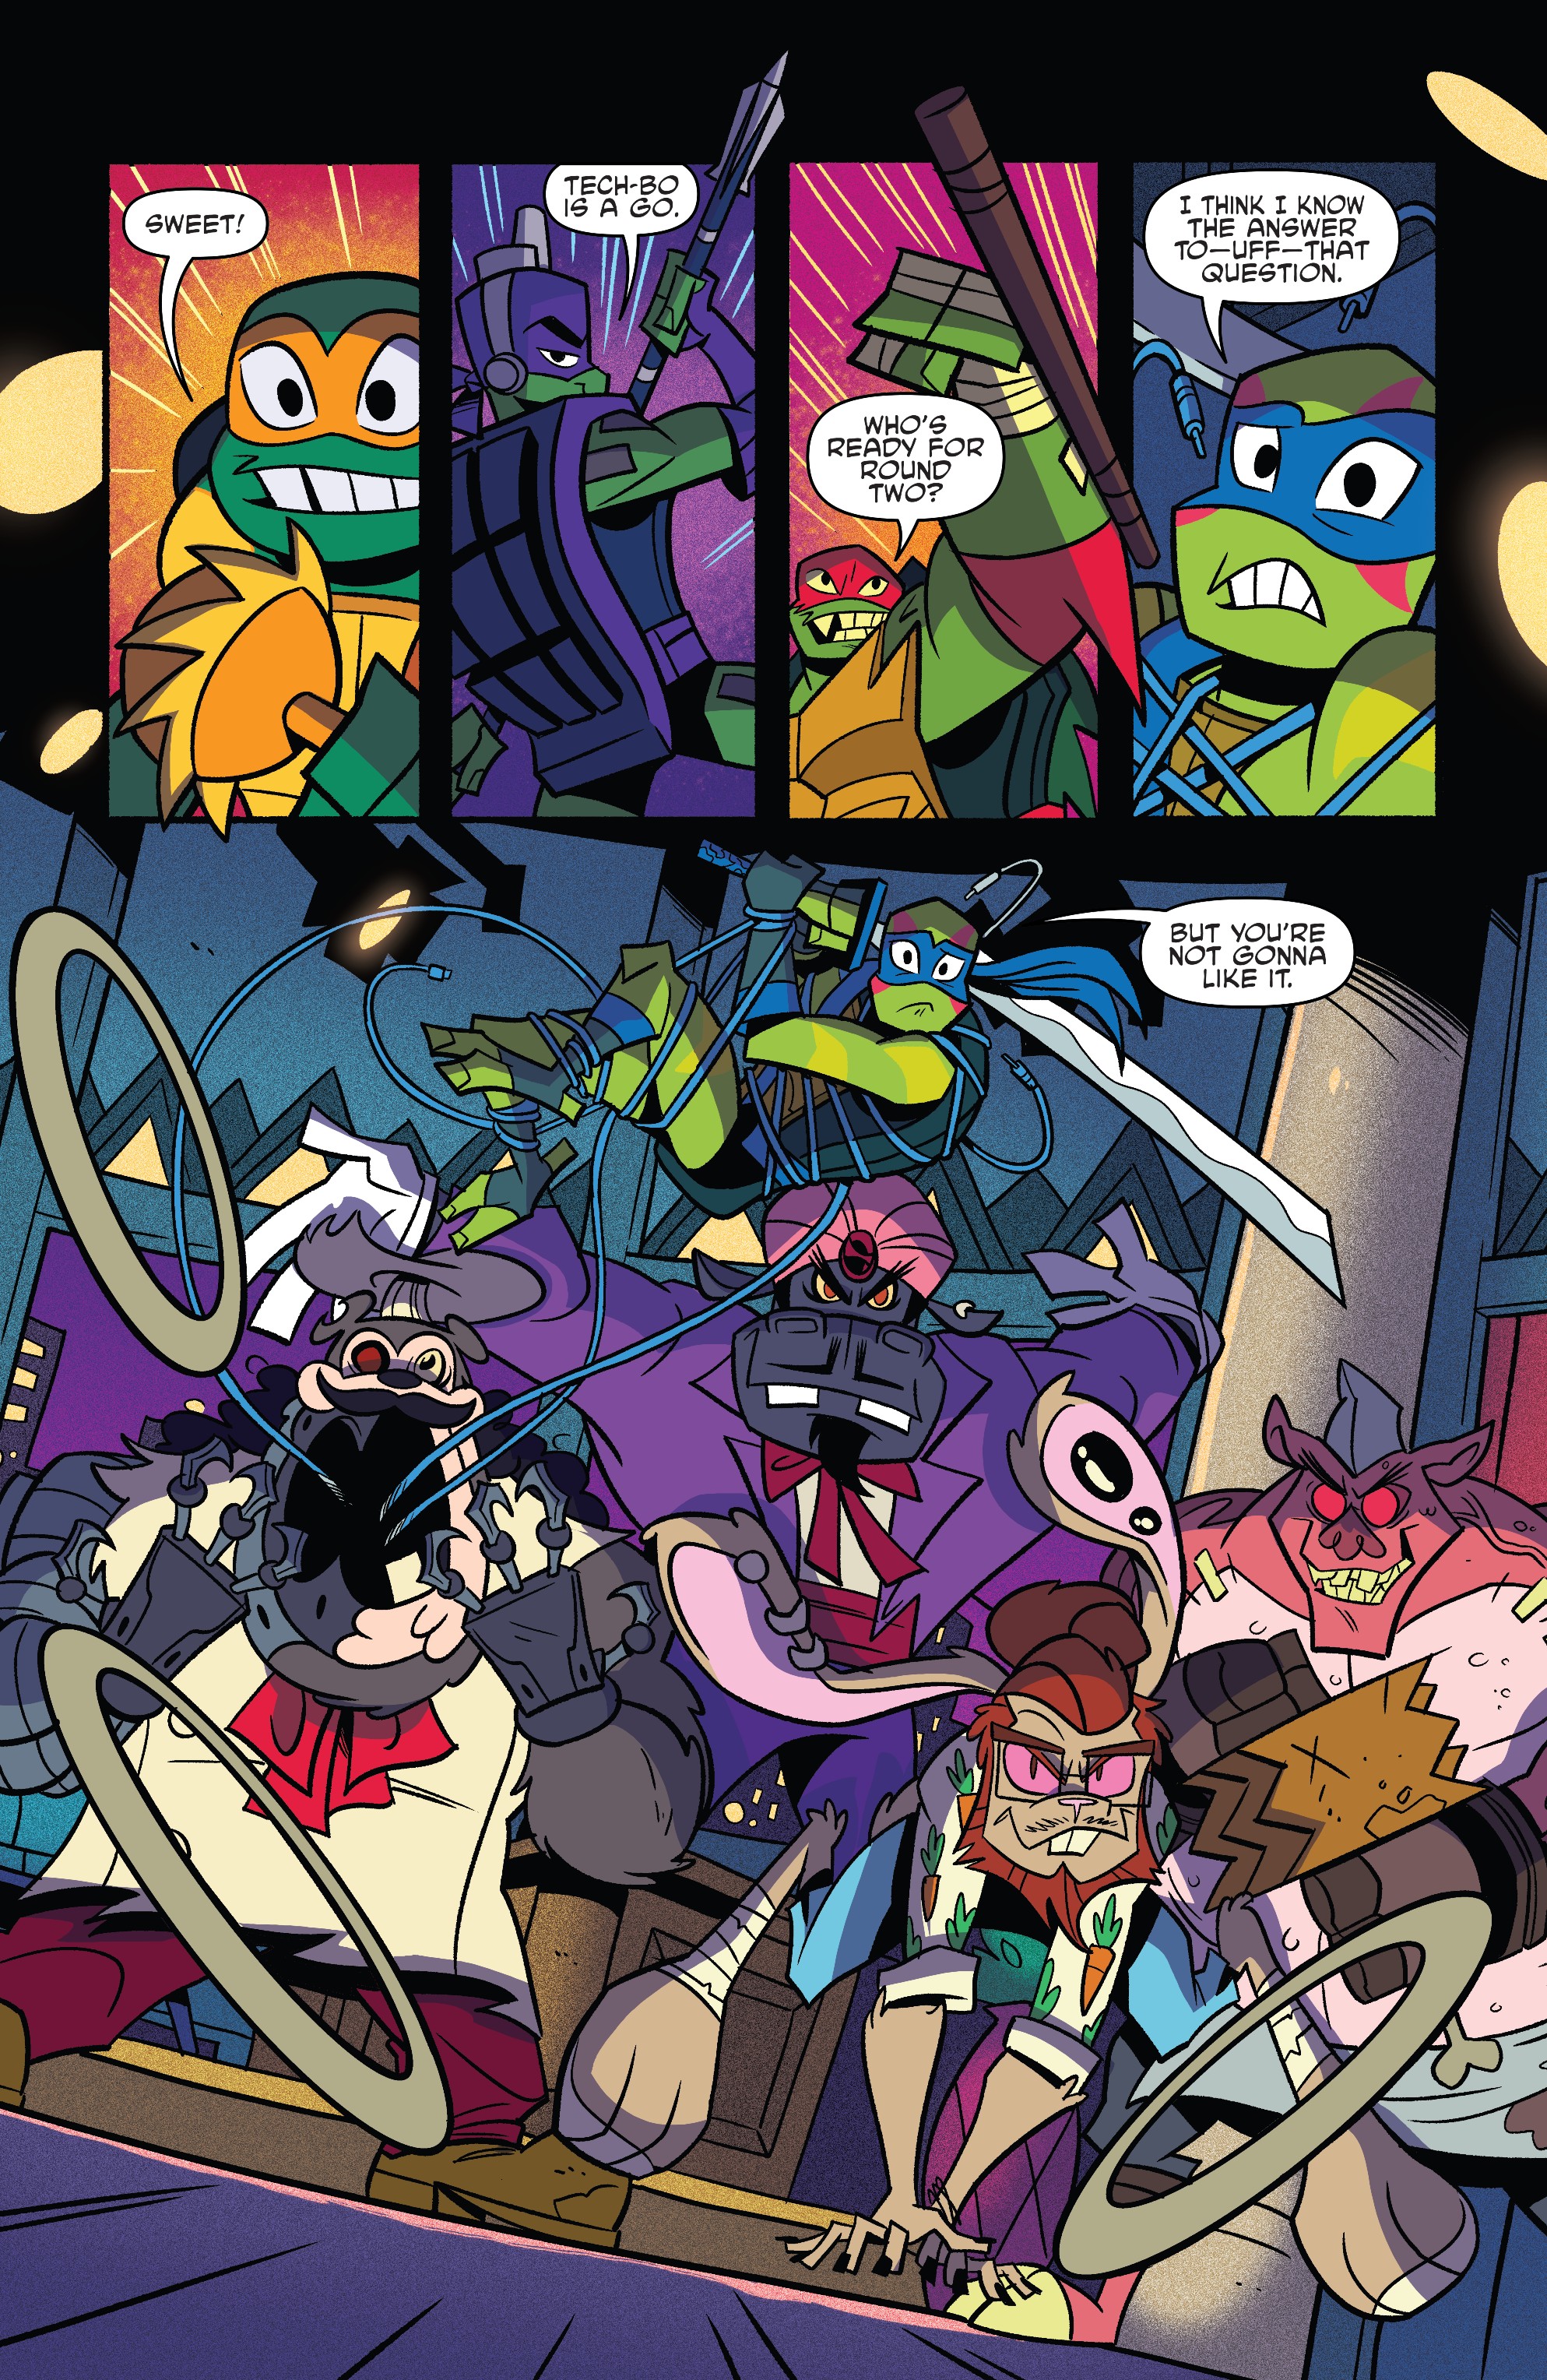 rise-of-the-teenage-mutant-ninja-turtles-issue-5-read-rise-of-the